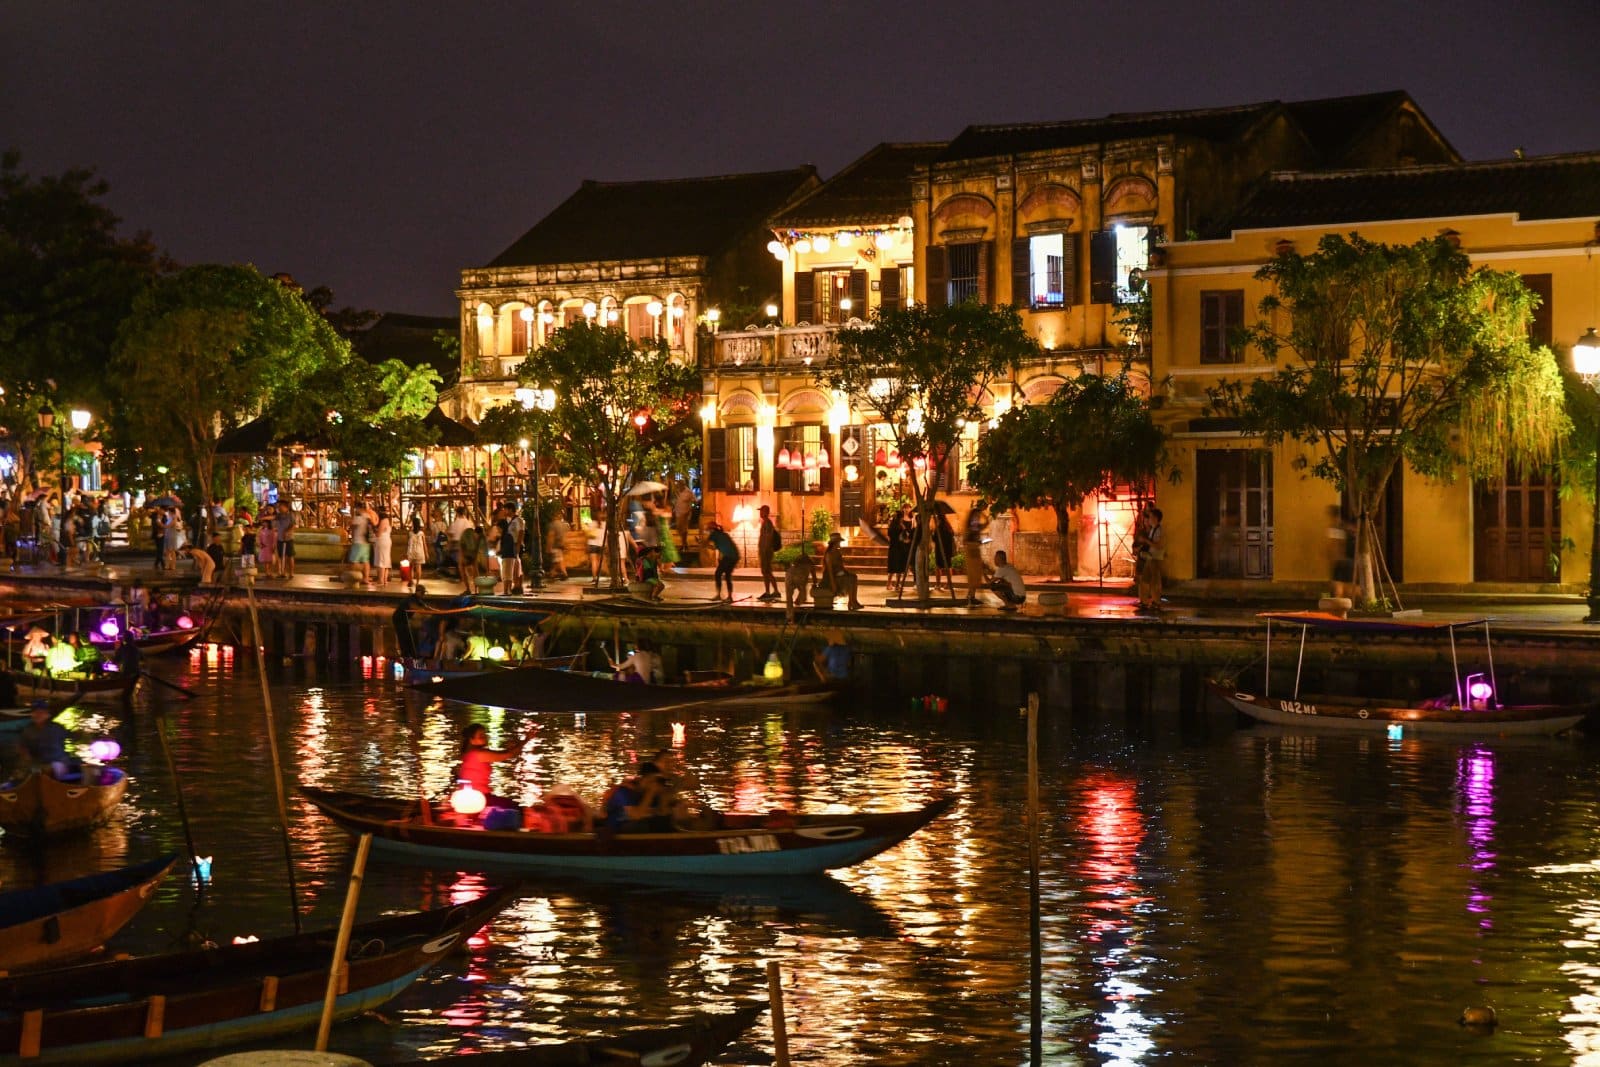 <p class="wp-caption-text">Image Credit: Shutterstock / Jason_yu</p>  <p><span>Hoi An is a beautifully preserved ancient town that reflects the influences of various Asian and European cultures that have come to its shores over the centuries. Its charming streets are lined with historic homes, tailor shops, and lantern-lit restaurants. The town is also famous for its custom tailoring, vibrant night markets, and the iconic Japanese Covered Bridge. Beyond the town, the countryside reveals lush rice paddies and serene rivers, perfect for bicycle tours.</span></p>